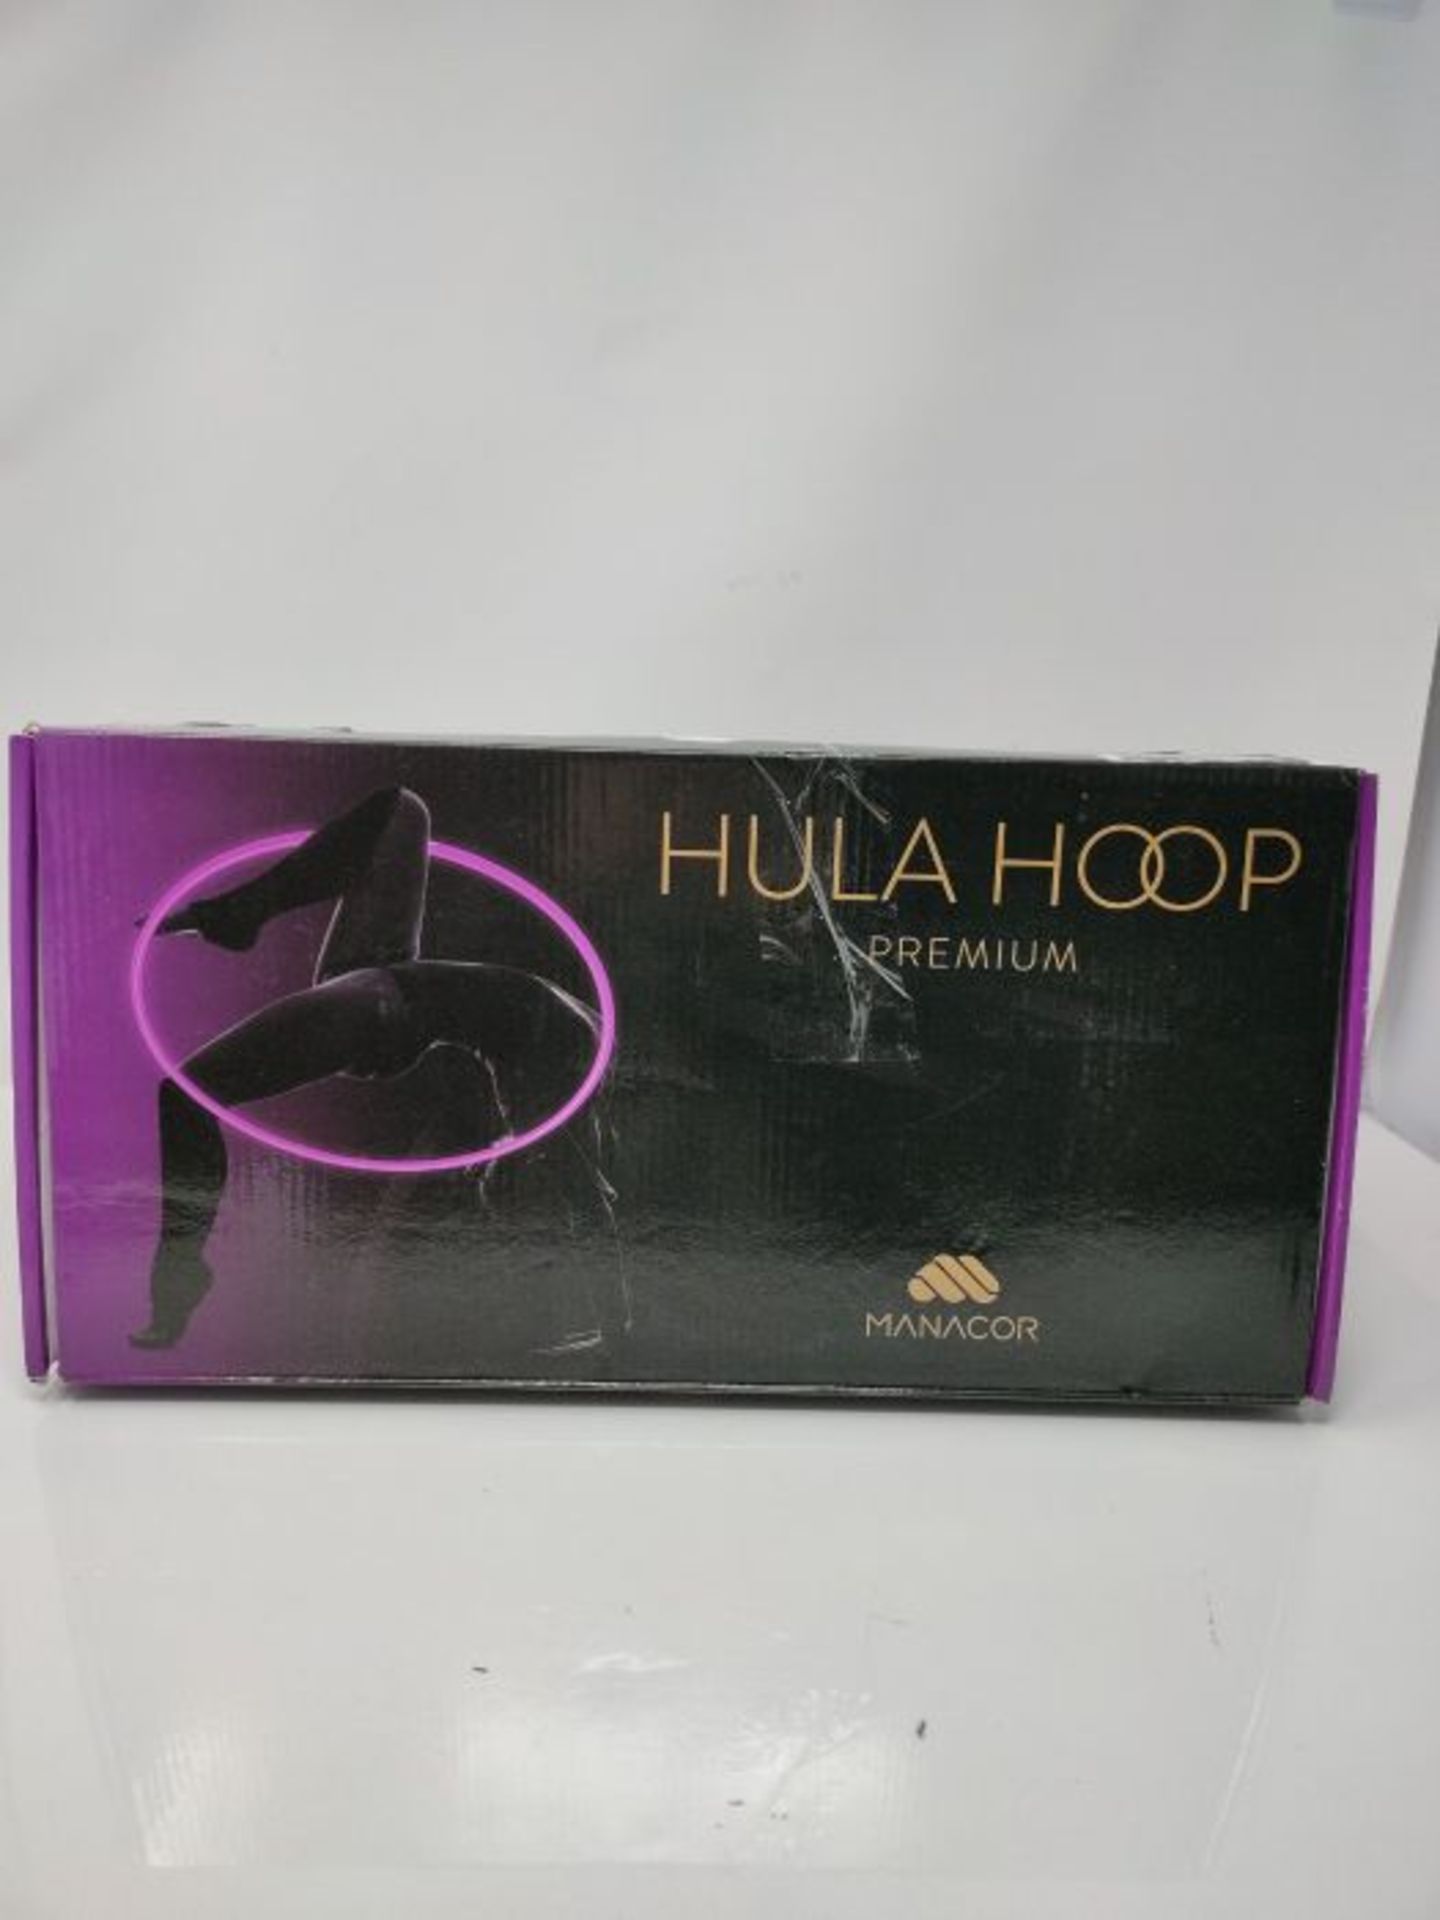 Manacor Hula Hoop for Adults & Children for Weight Loss and Massage, A 6-8 Piece Remov - Image 2 of 3